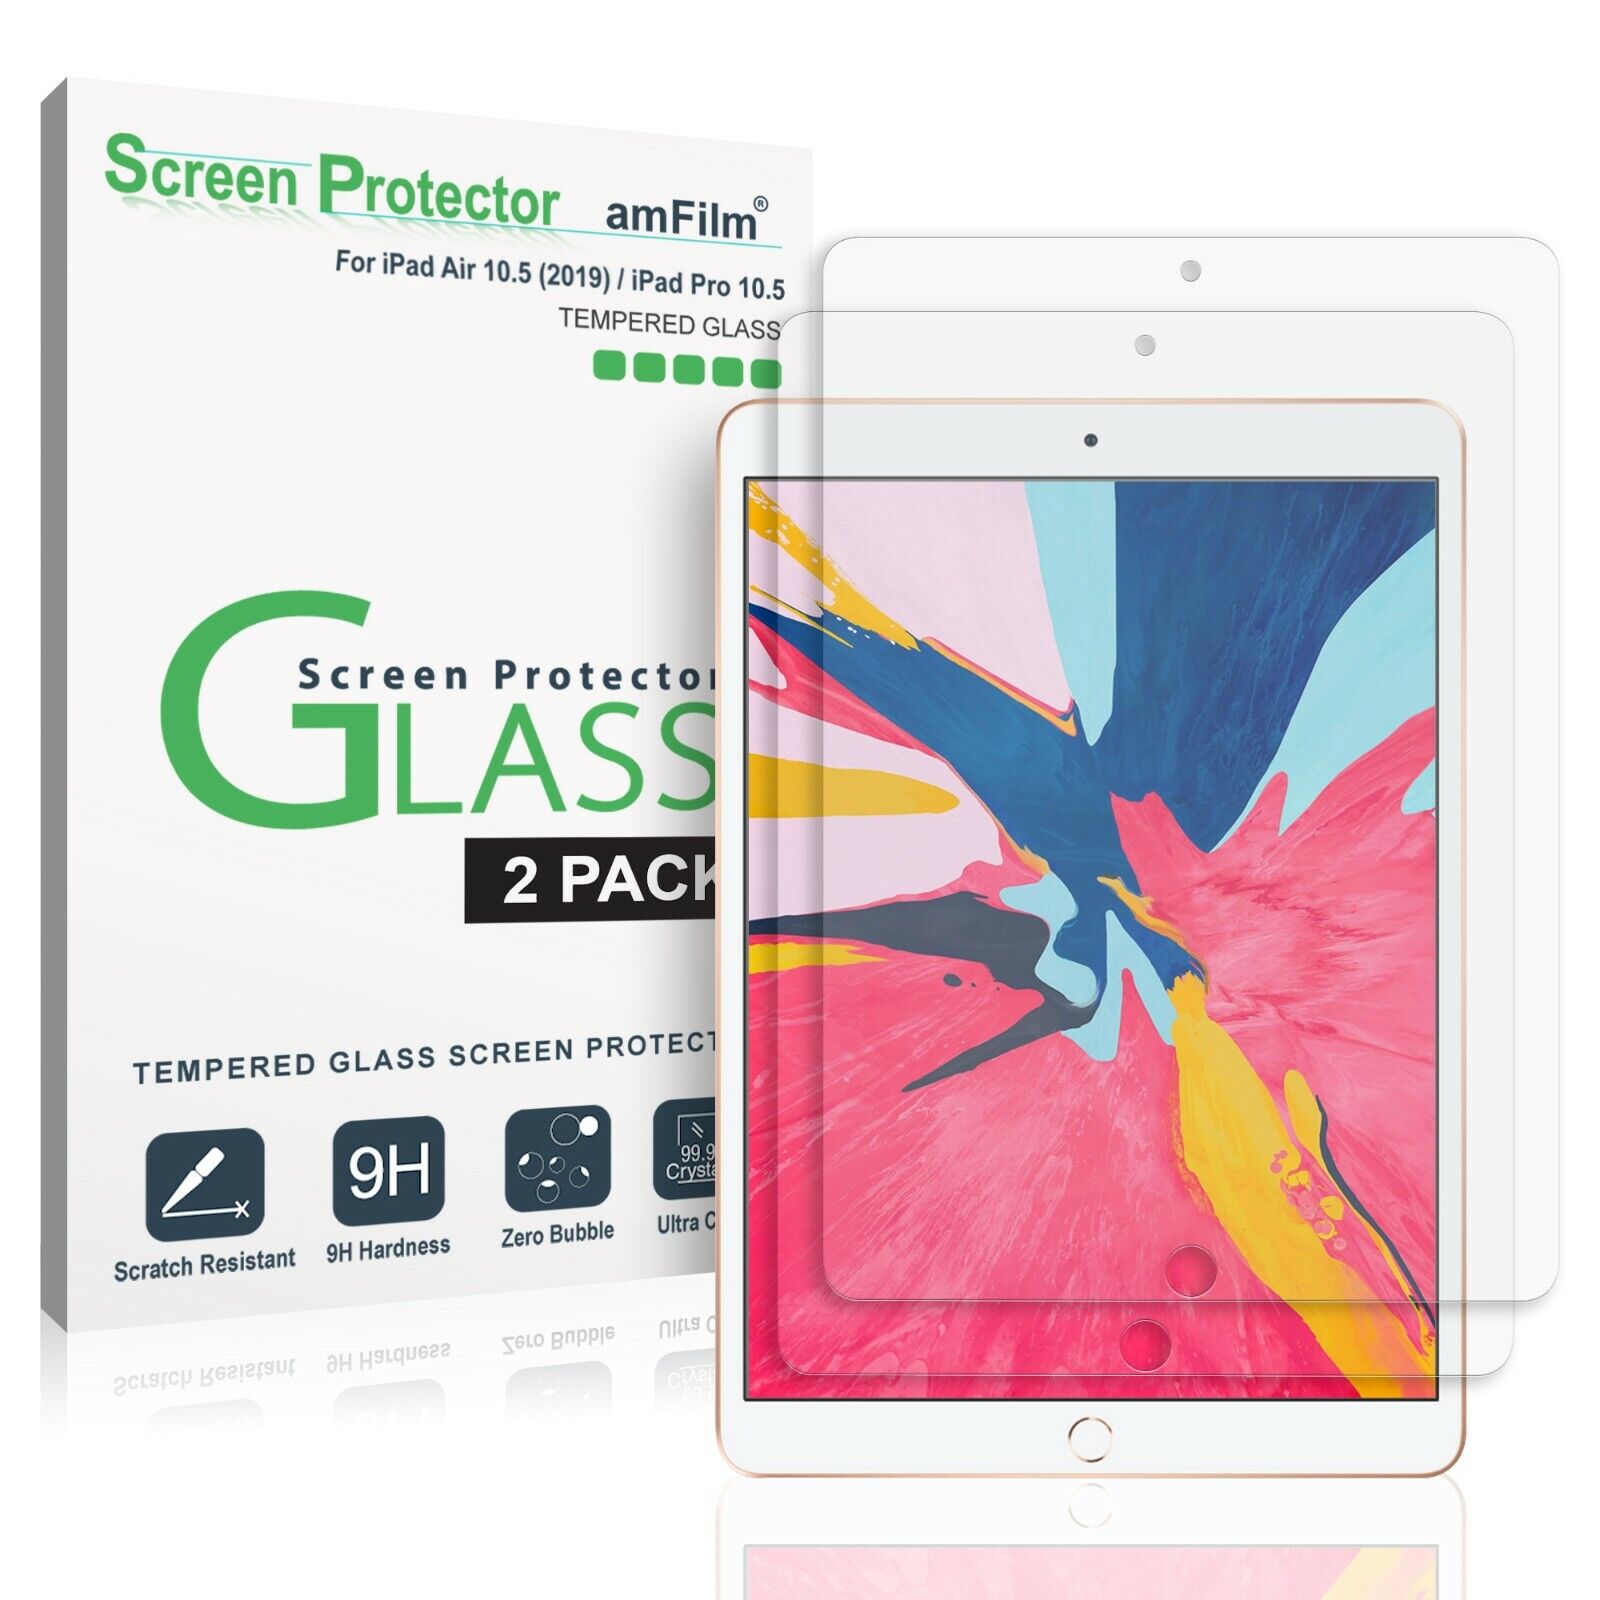 amFilm Tempered Glass Screen Protector for iPad Air 3 / iPad Pro 10.5 (2 Pack)